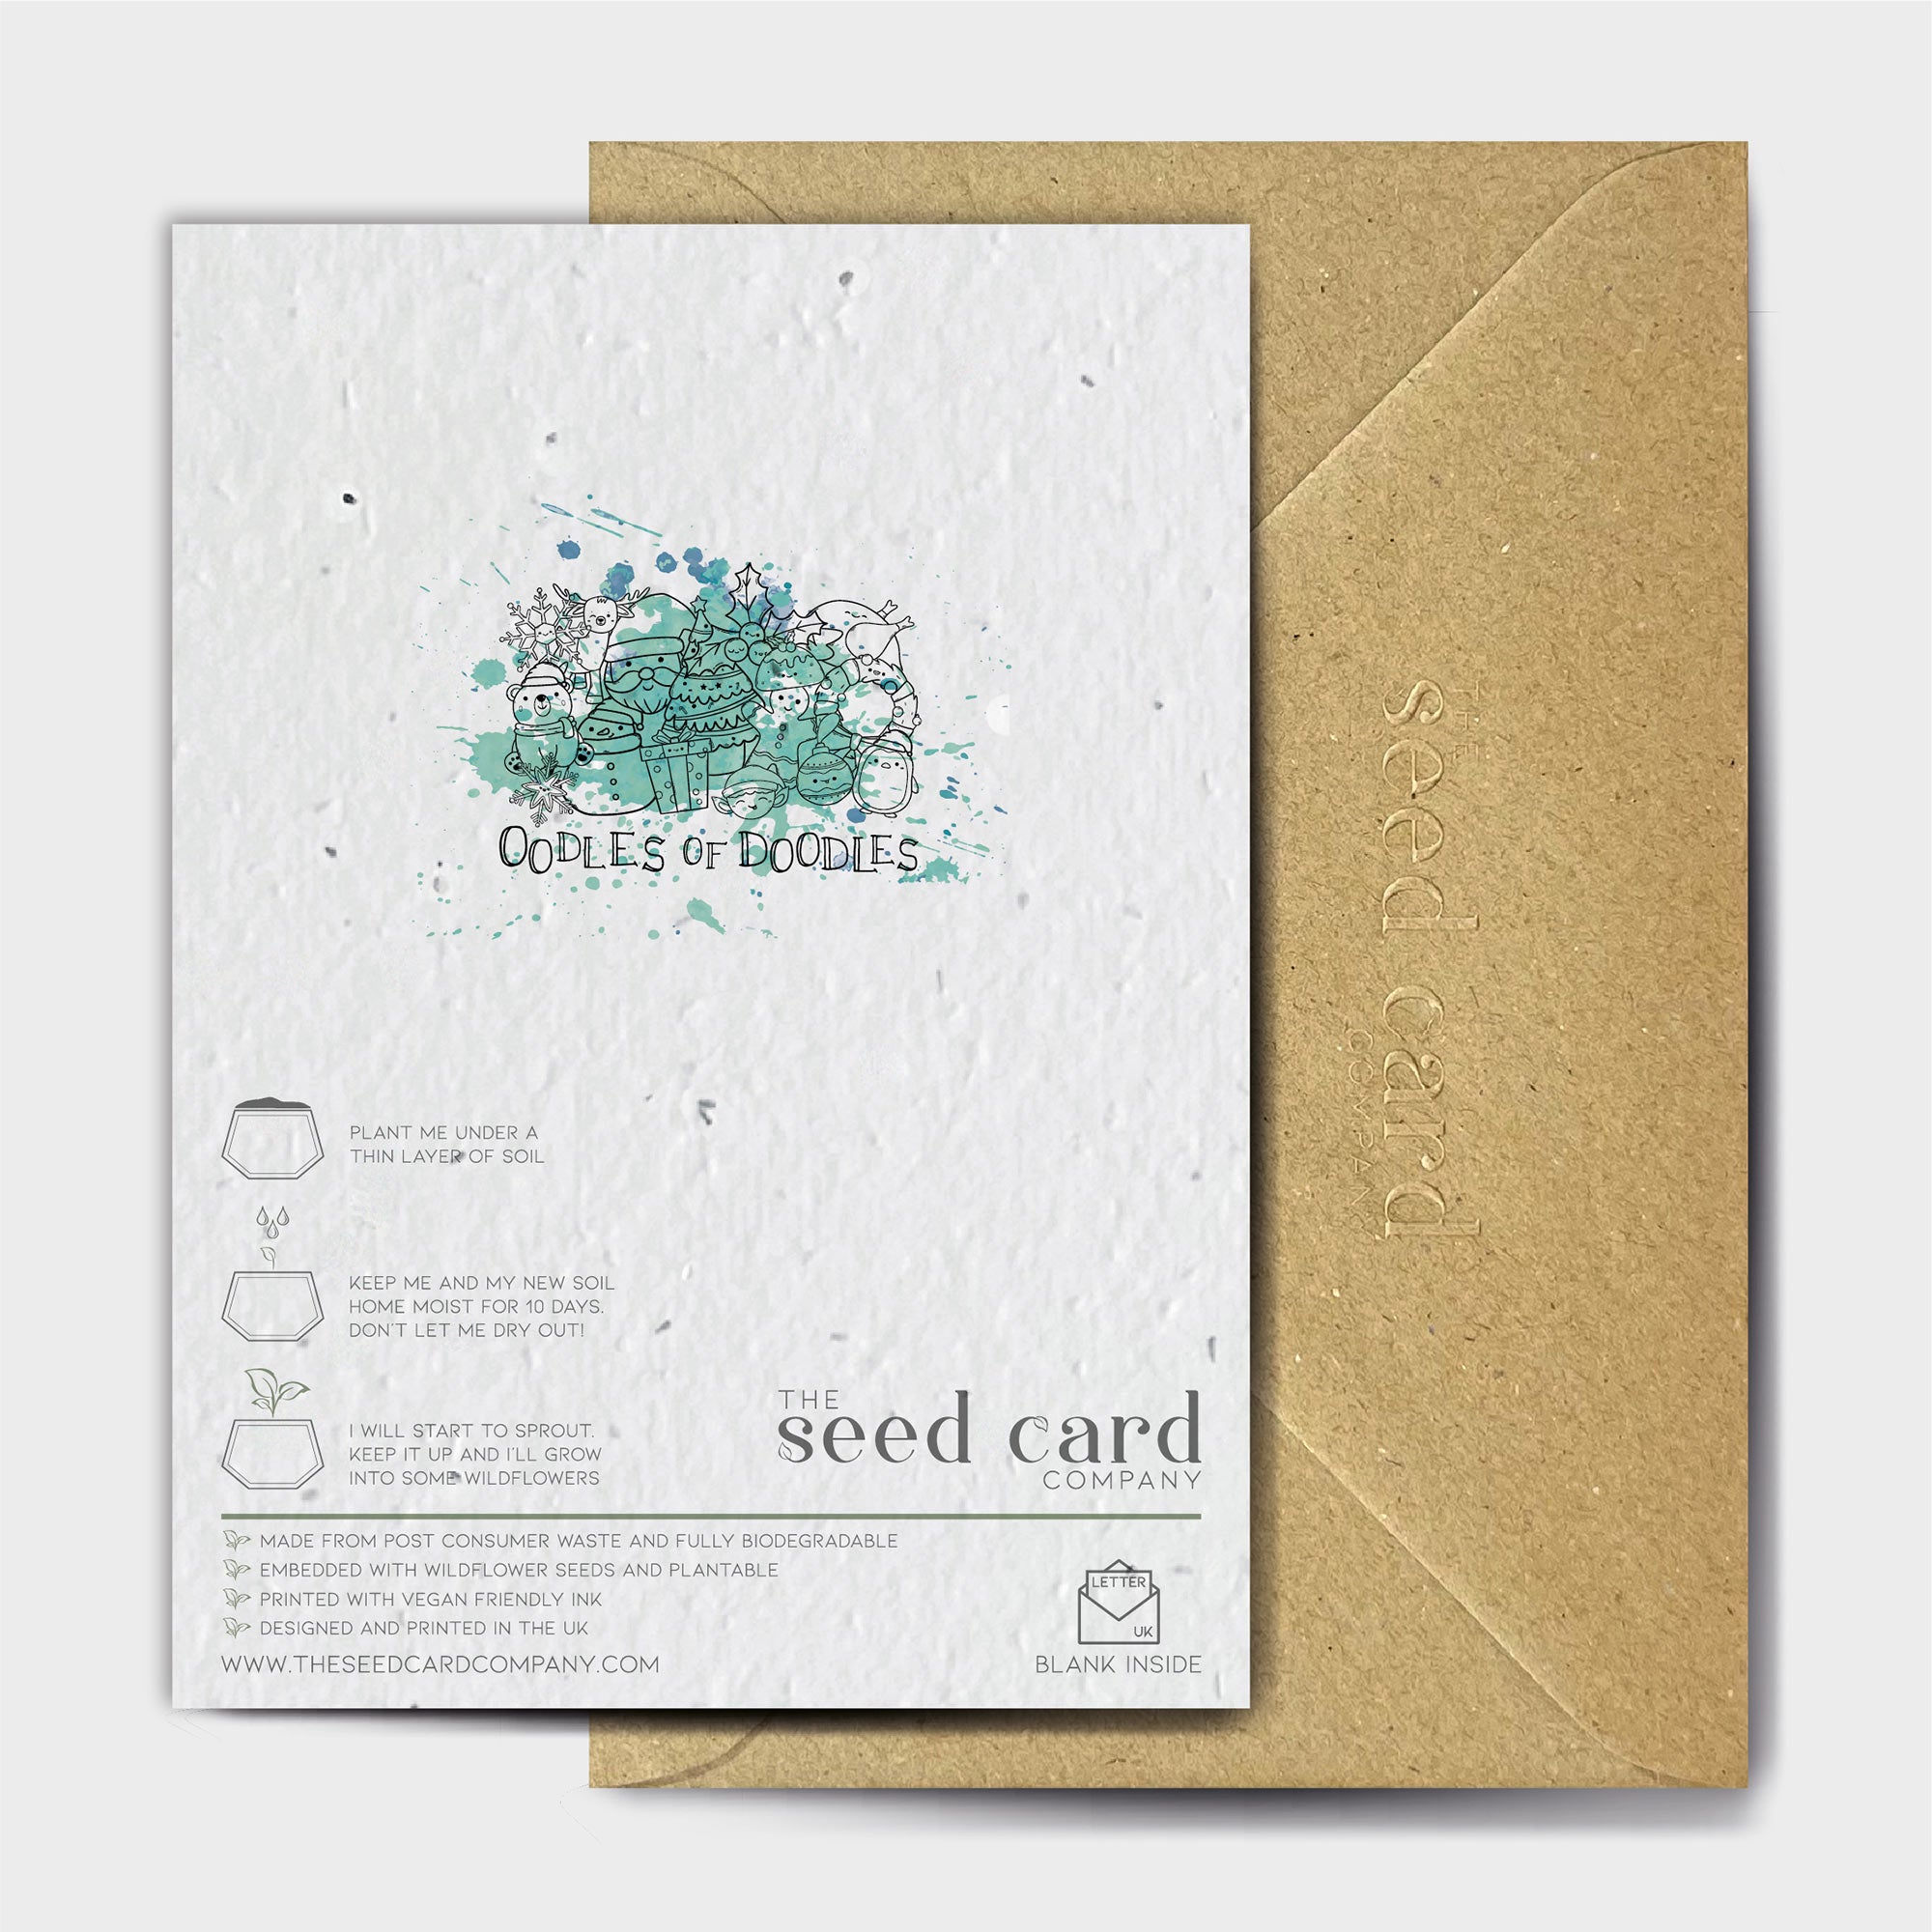 Shop online Snow Much Fun - 100% biodegradable seed-embedded cards Shop -The Seed Card Company